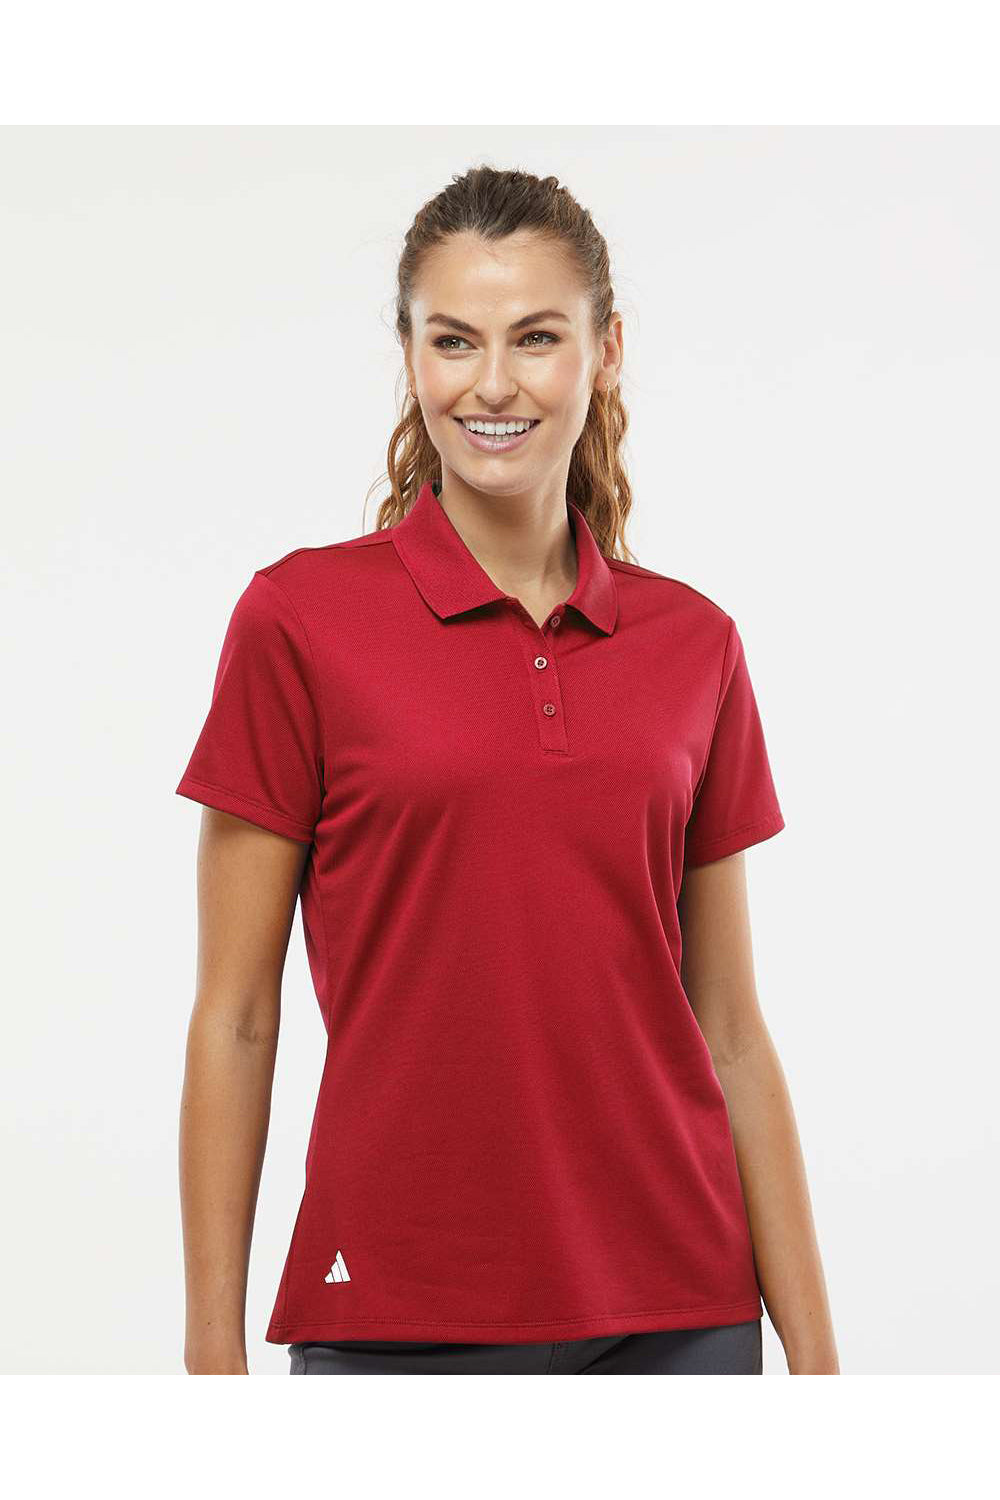 Adidas A431 Womens Basic Short Sleeve Polo Shirt Power Red Model Front